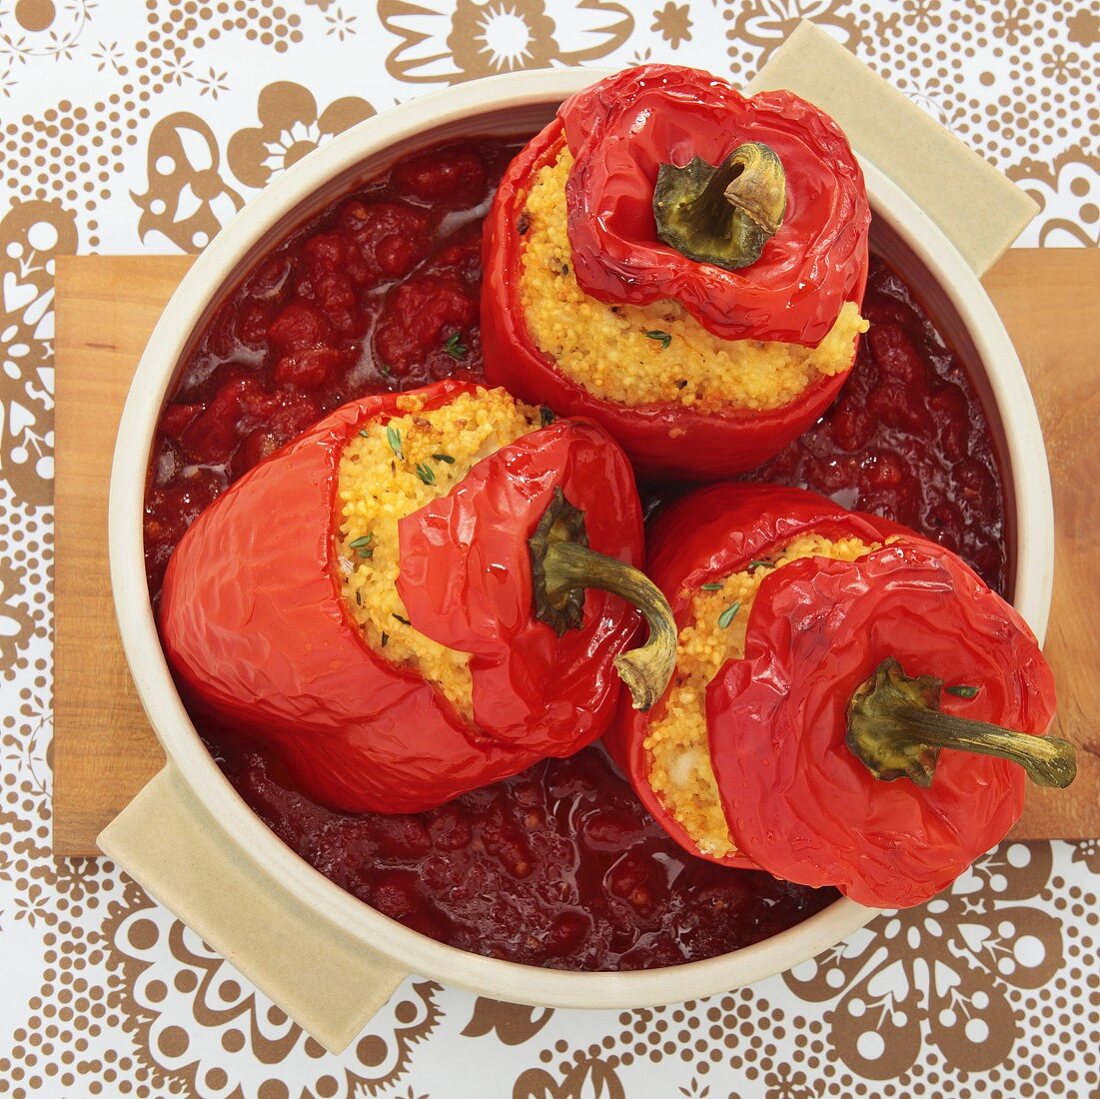 Stuffed peppers with couscous in tomato sauce